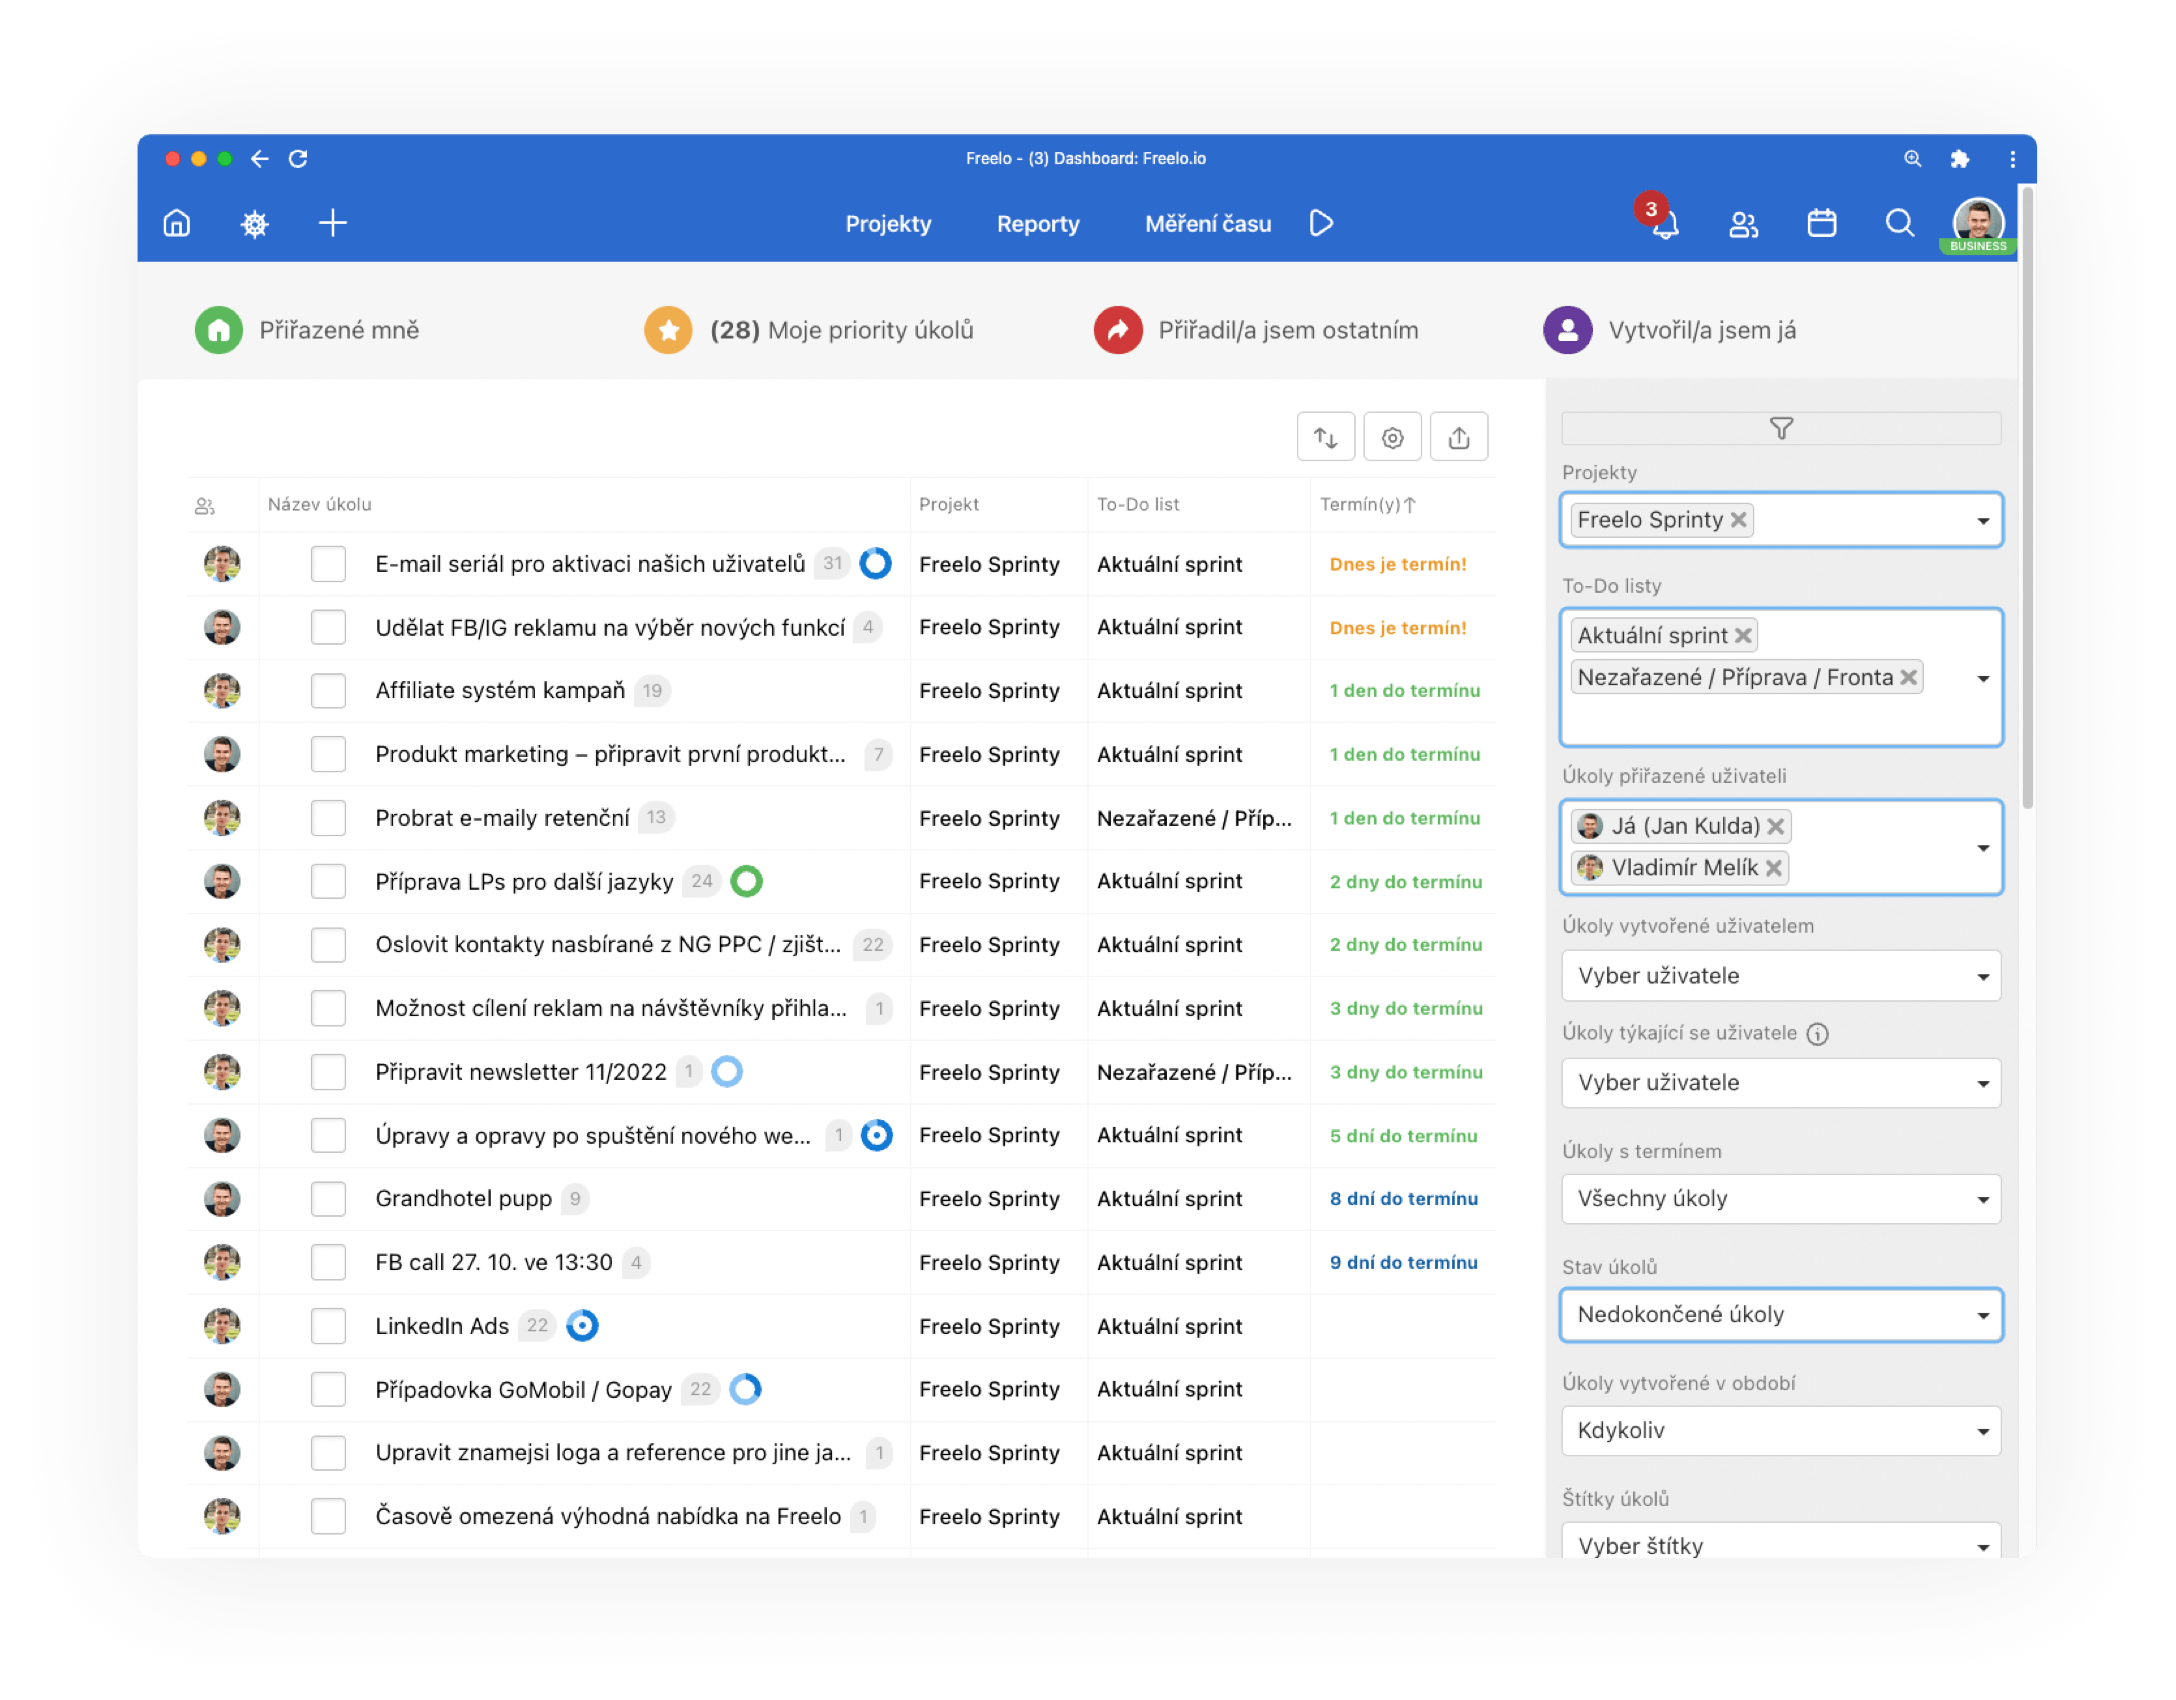 Dashboard feature inside of the Freelo application